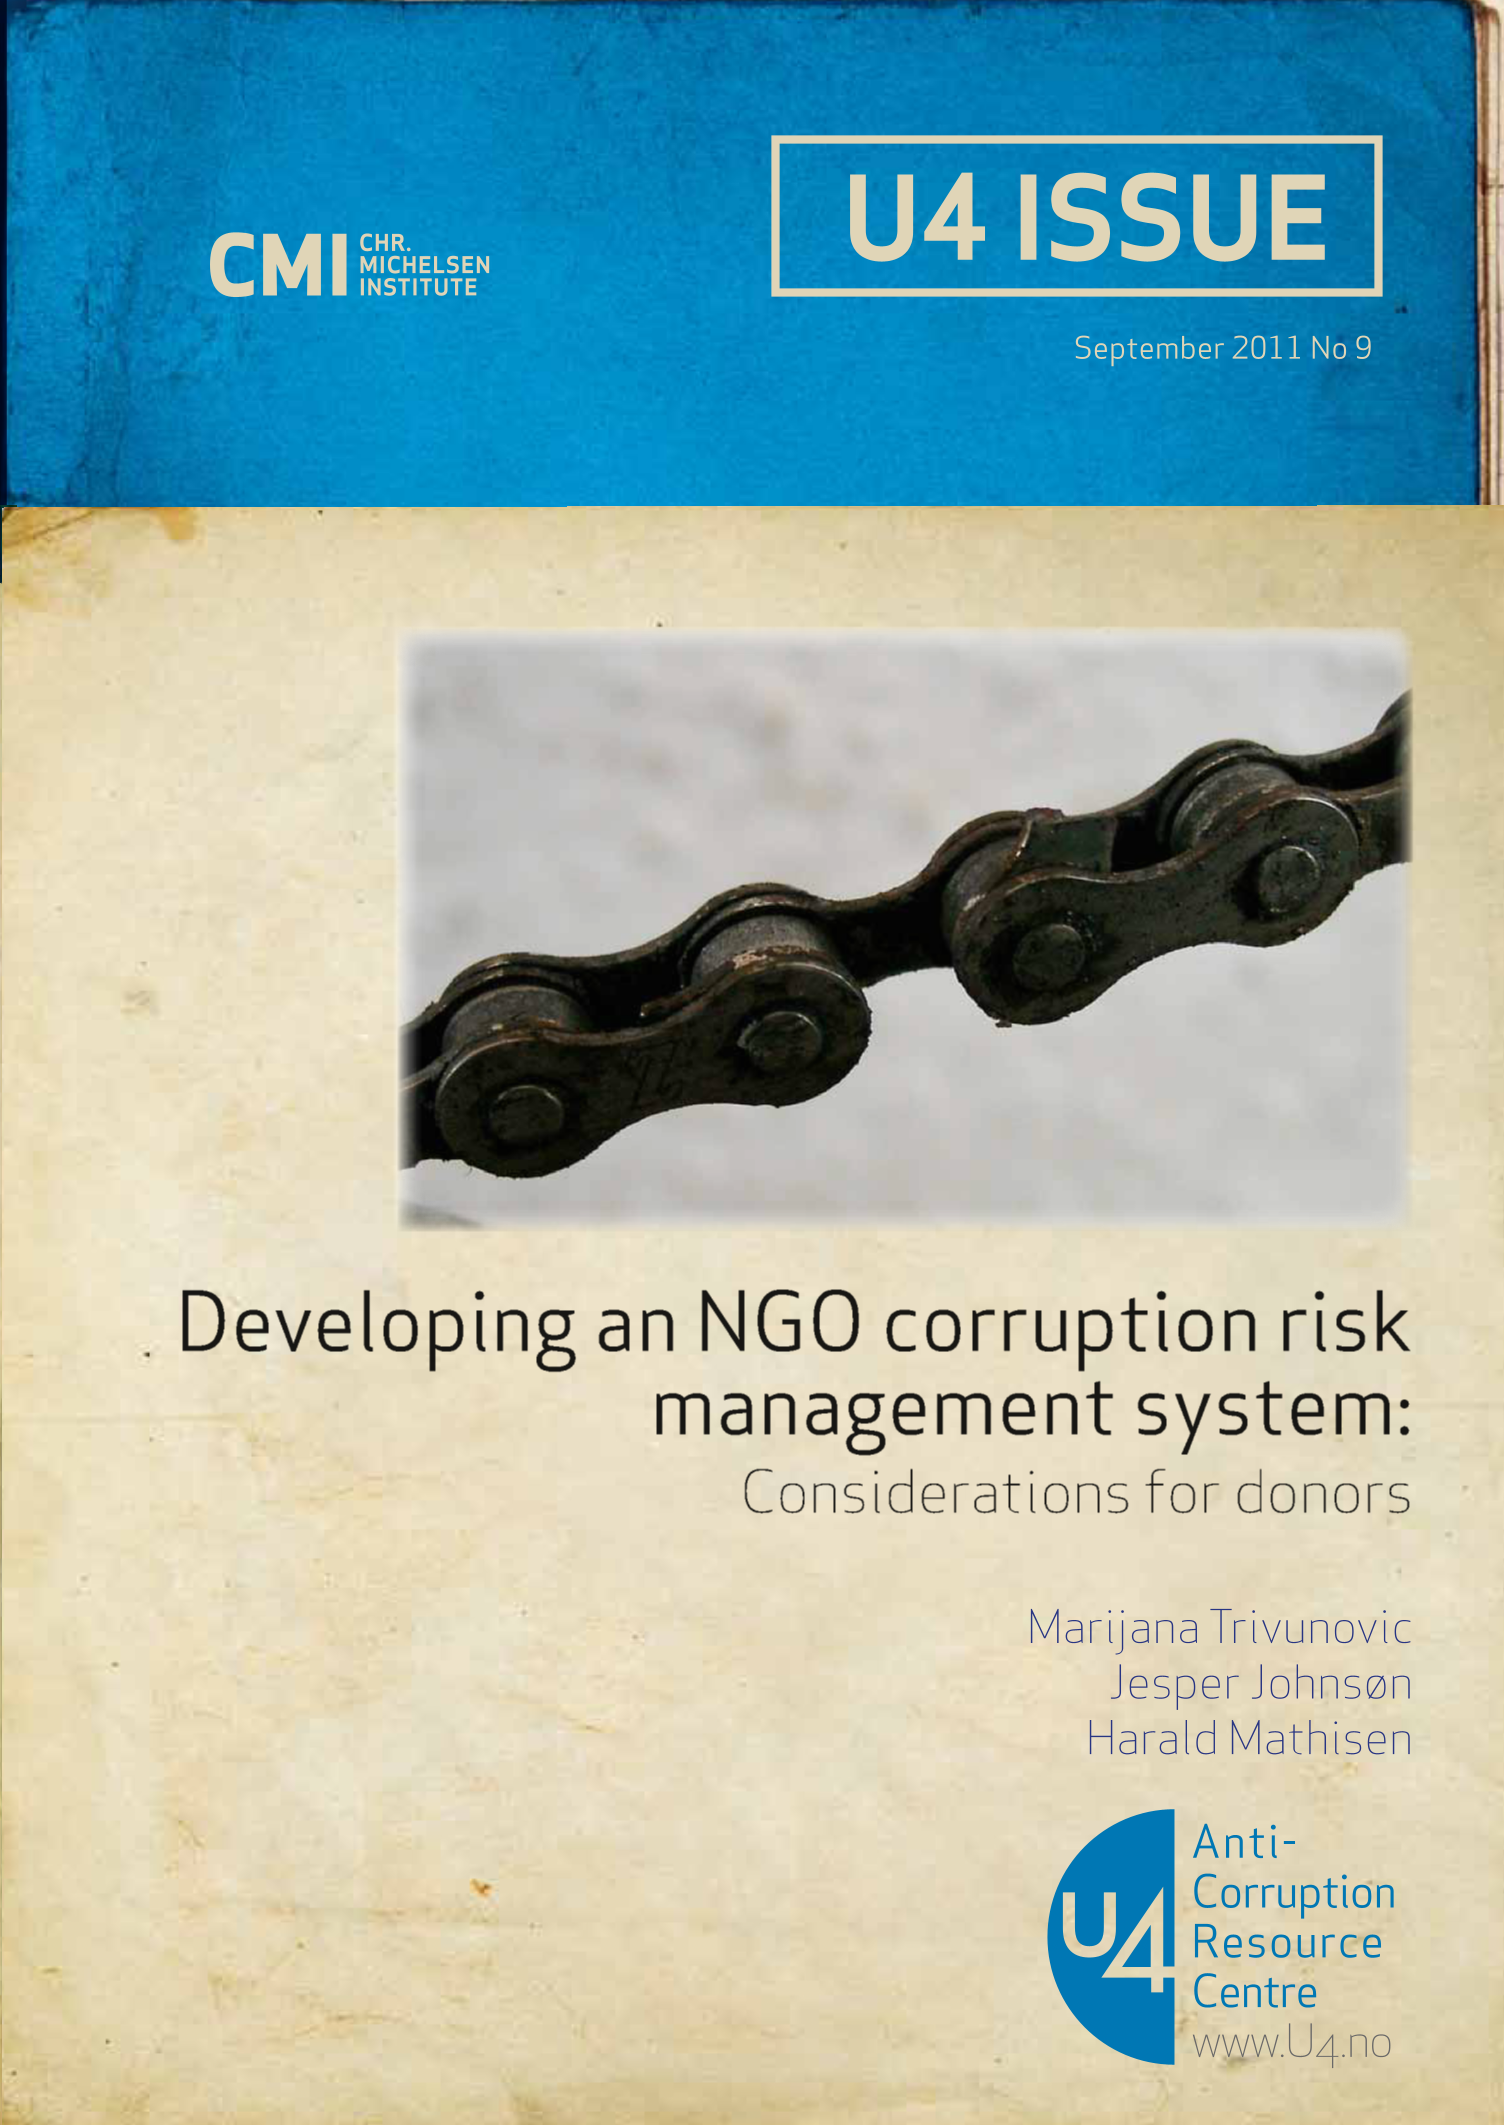 Developing an NGO corruption risk management system: Considerations for donors